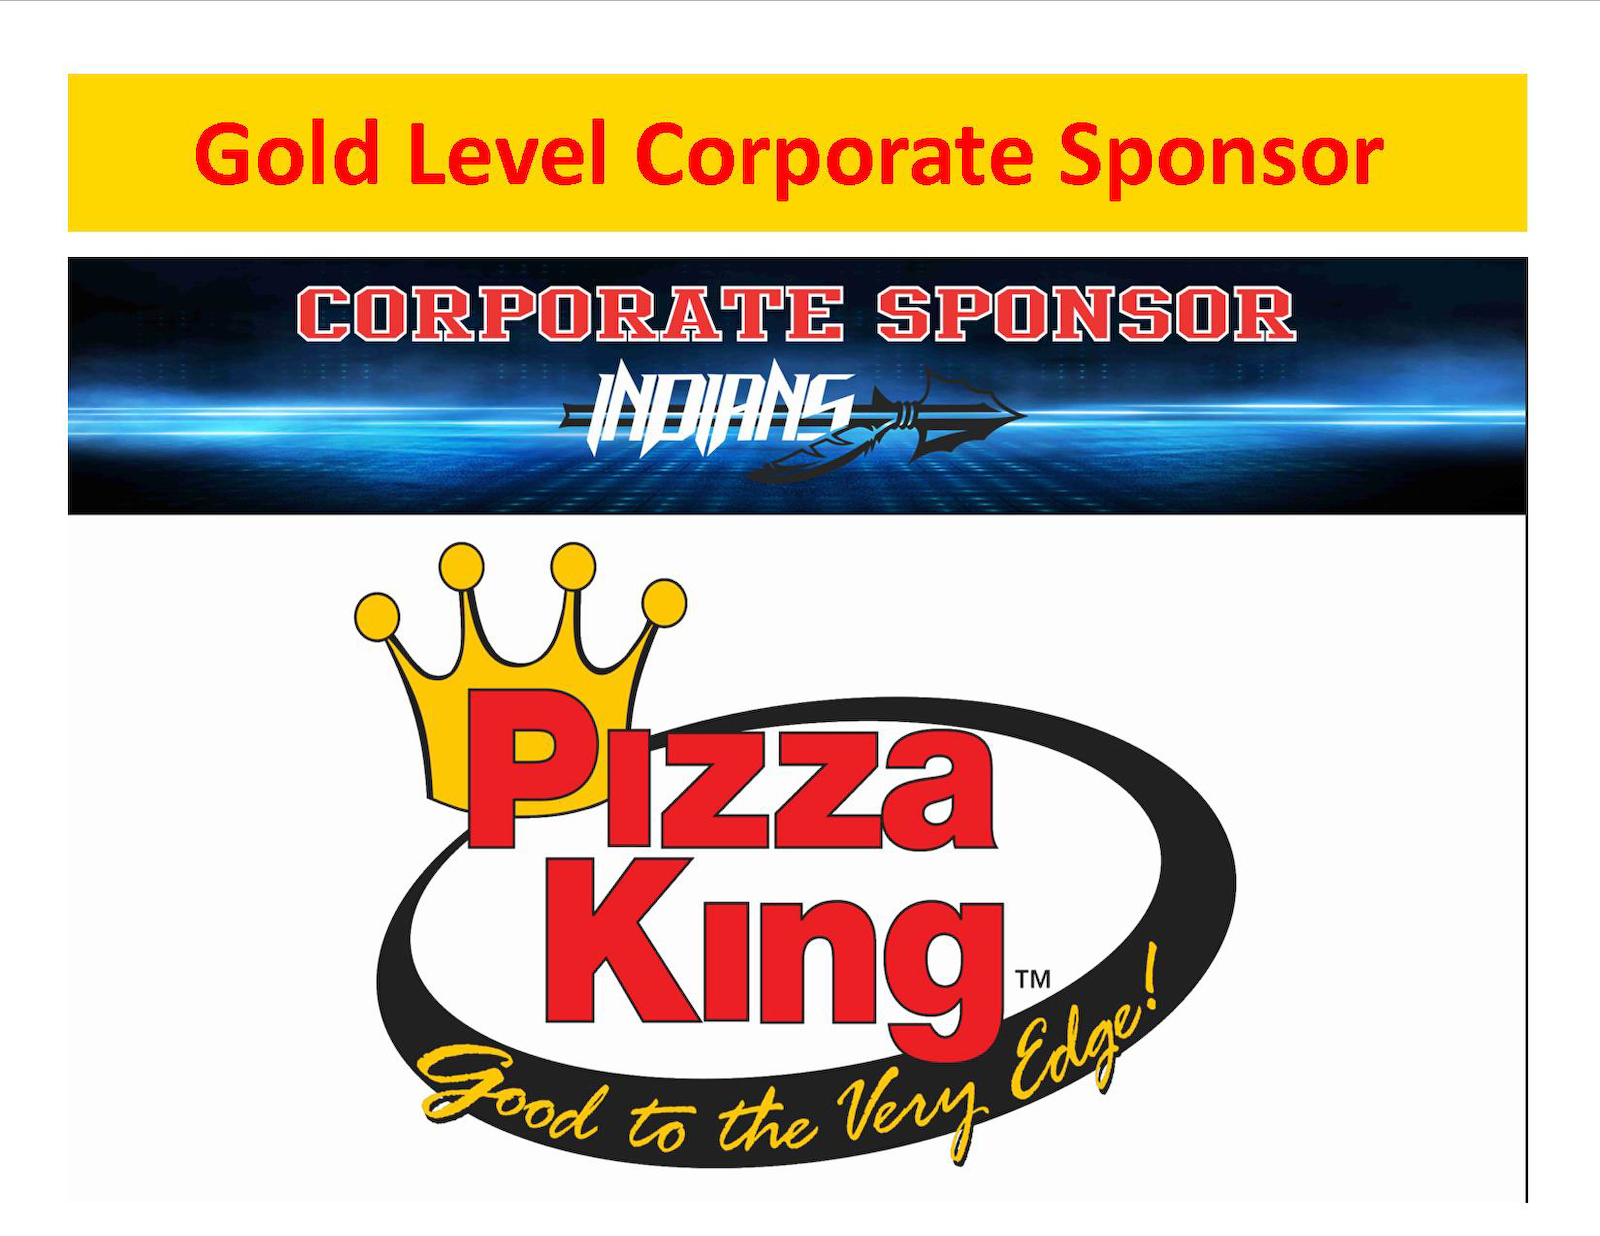 Pizza King of Union City